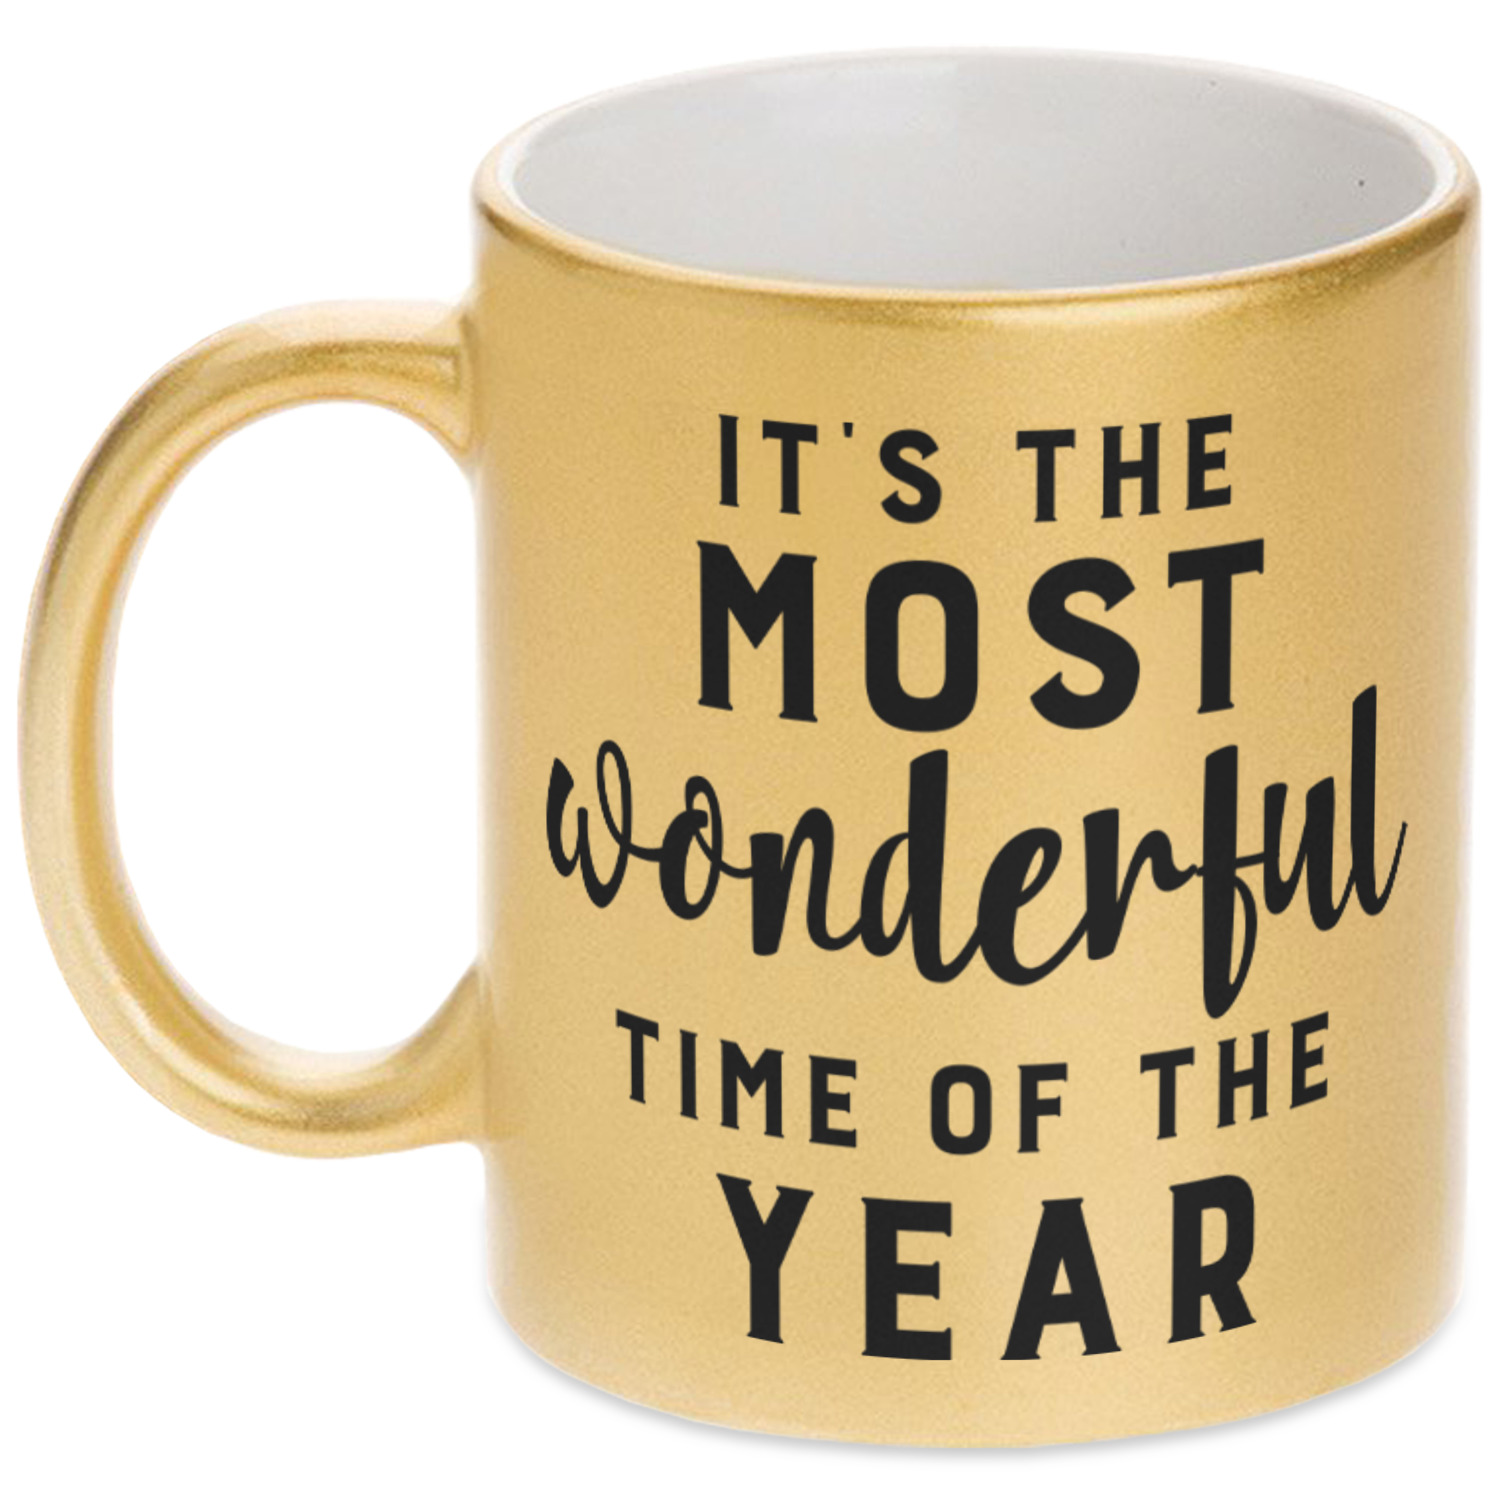 https://www.youcustomizeit.com/common/MAKE/1038049/Christmas-Quotes-and-Sayings-Gold-Mug-Main.jpg?lm=1665727727